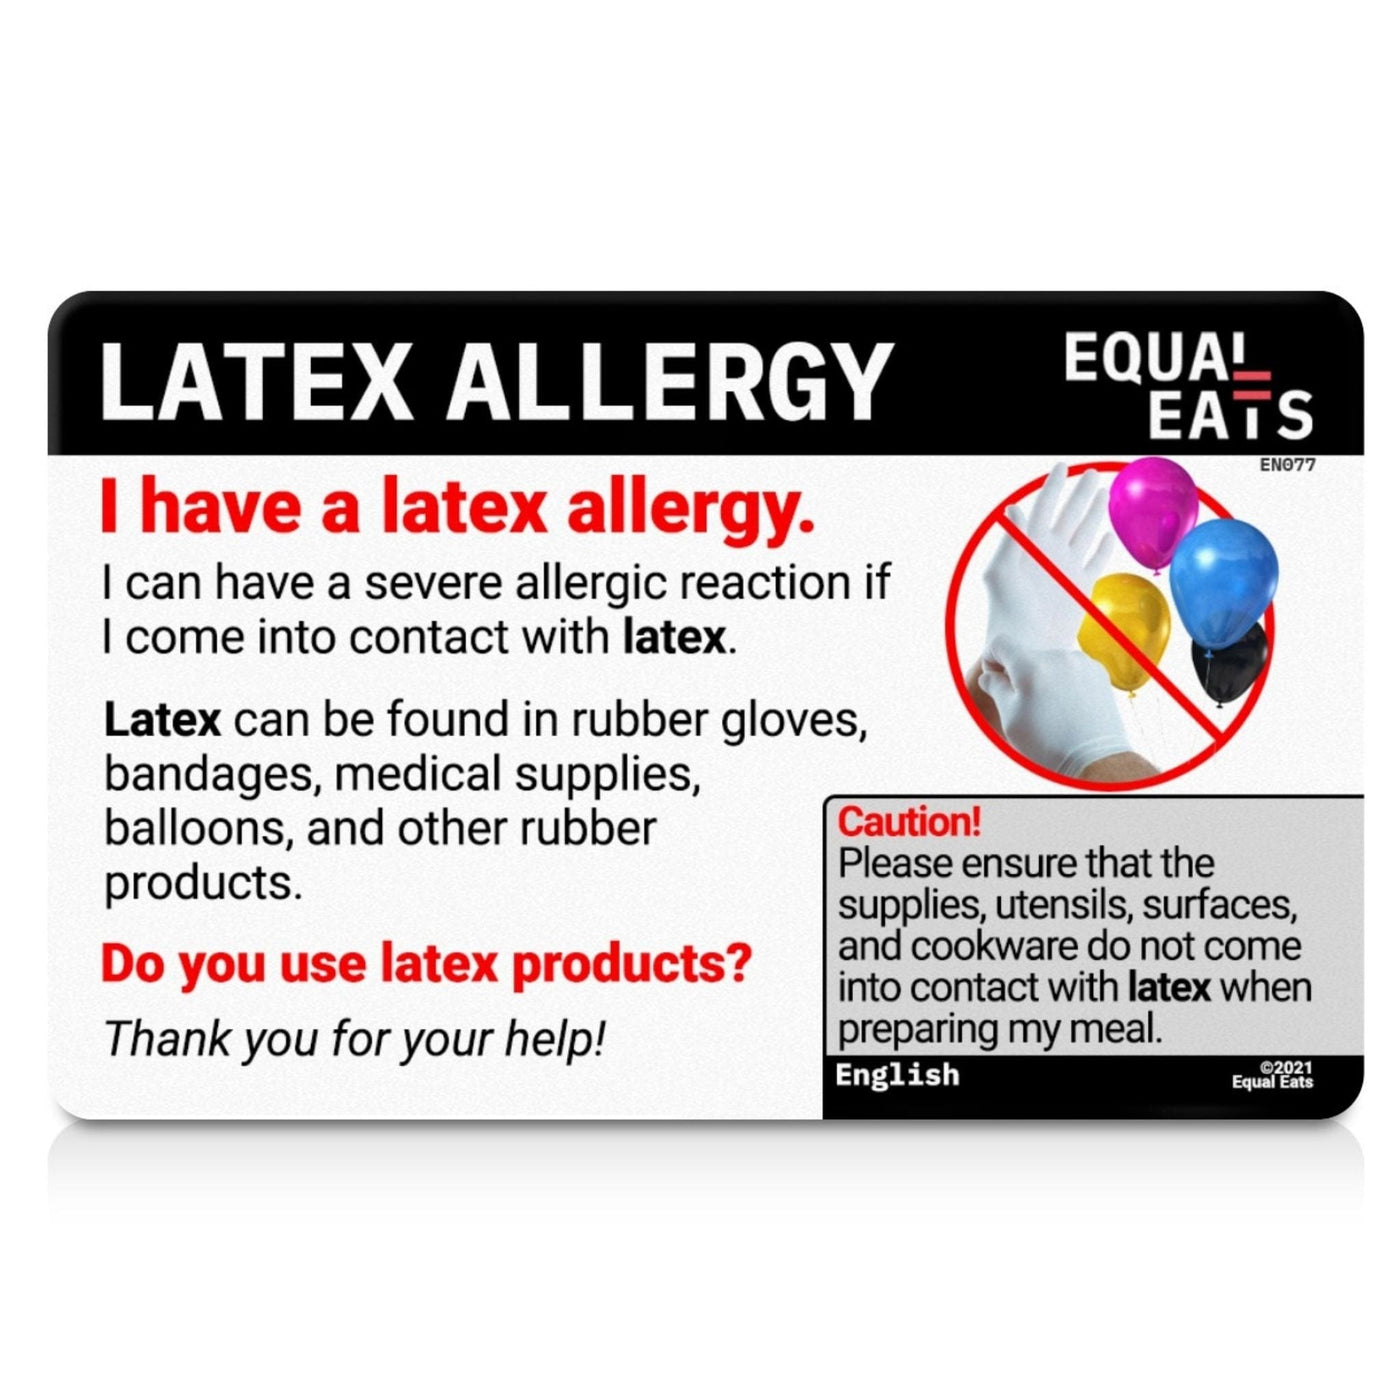 Latex Allergy Cards, Equal Eats